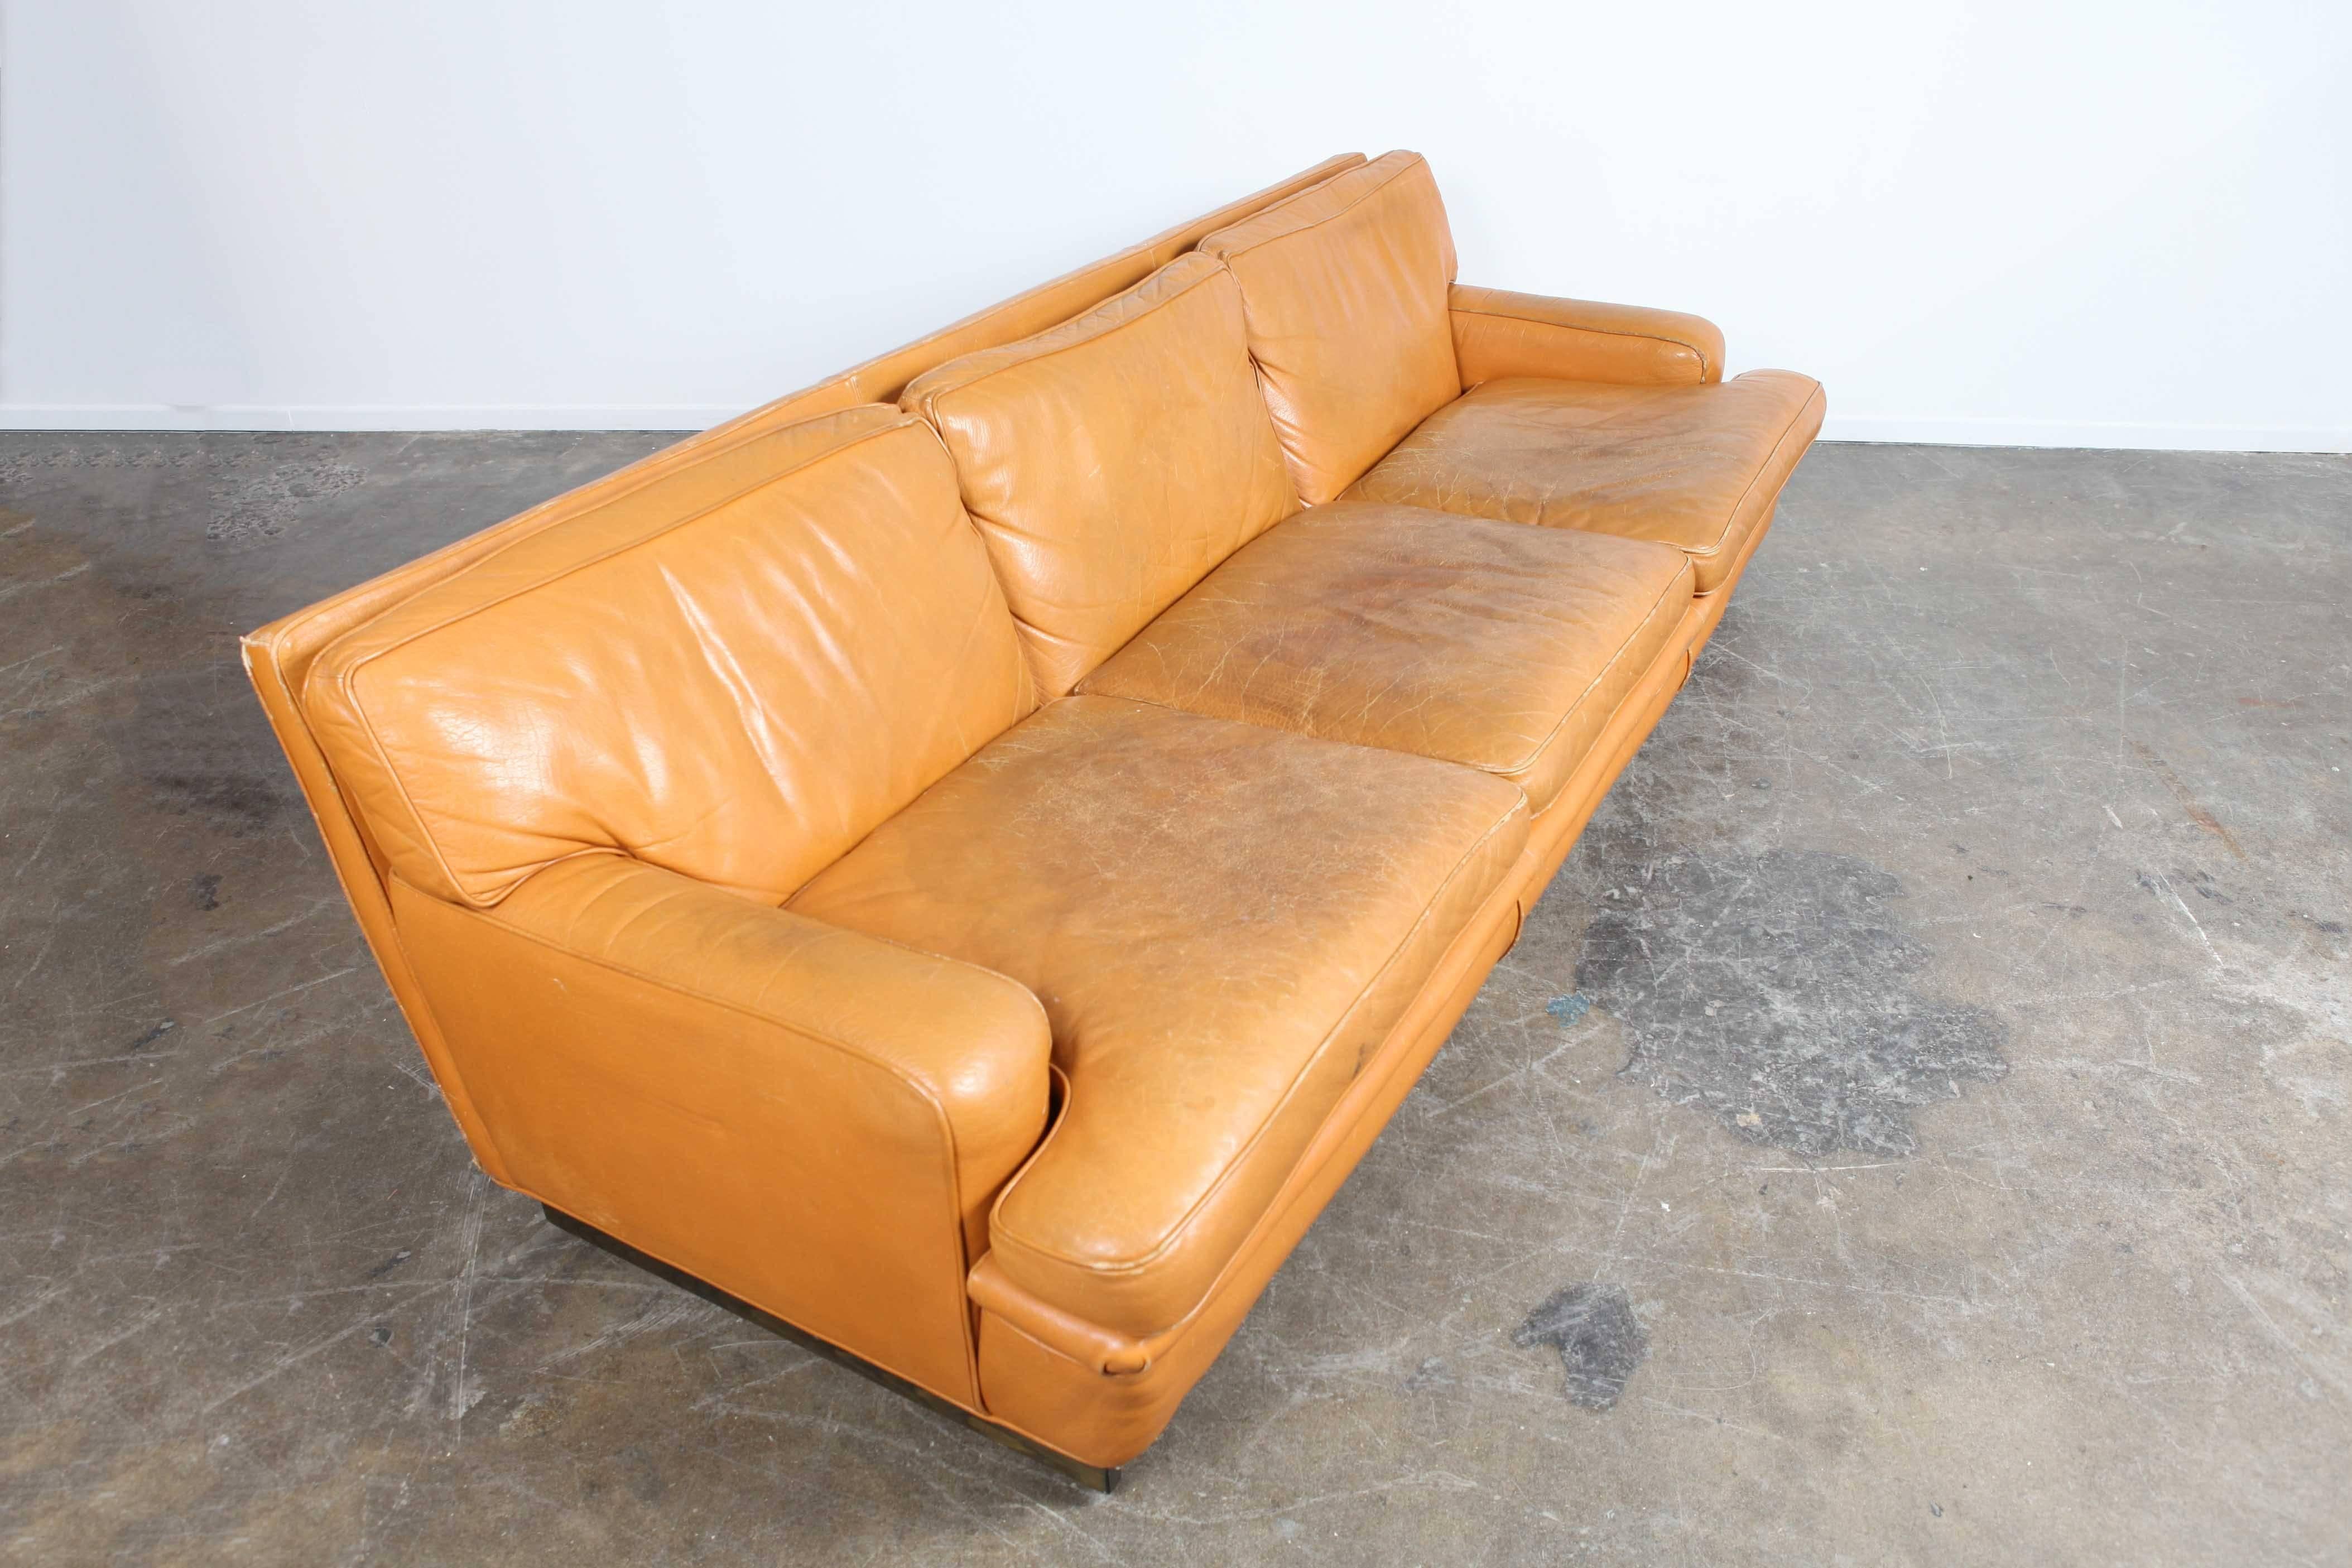 Three-seat camel leather sofa on a plinth base, most likely designed and produced by Arne Norell (not confirmed). Original leather has a wonderful patina to it and it's a very comfortable sofa.